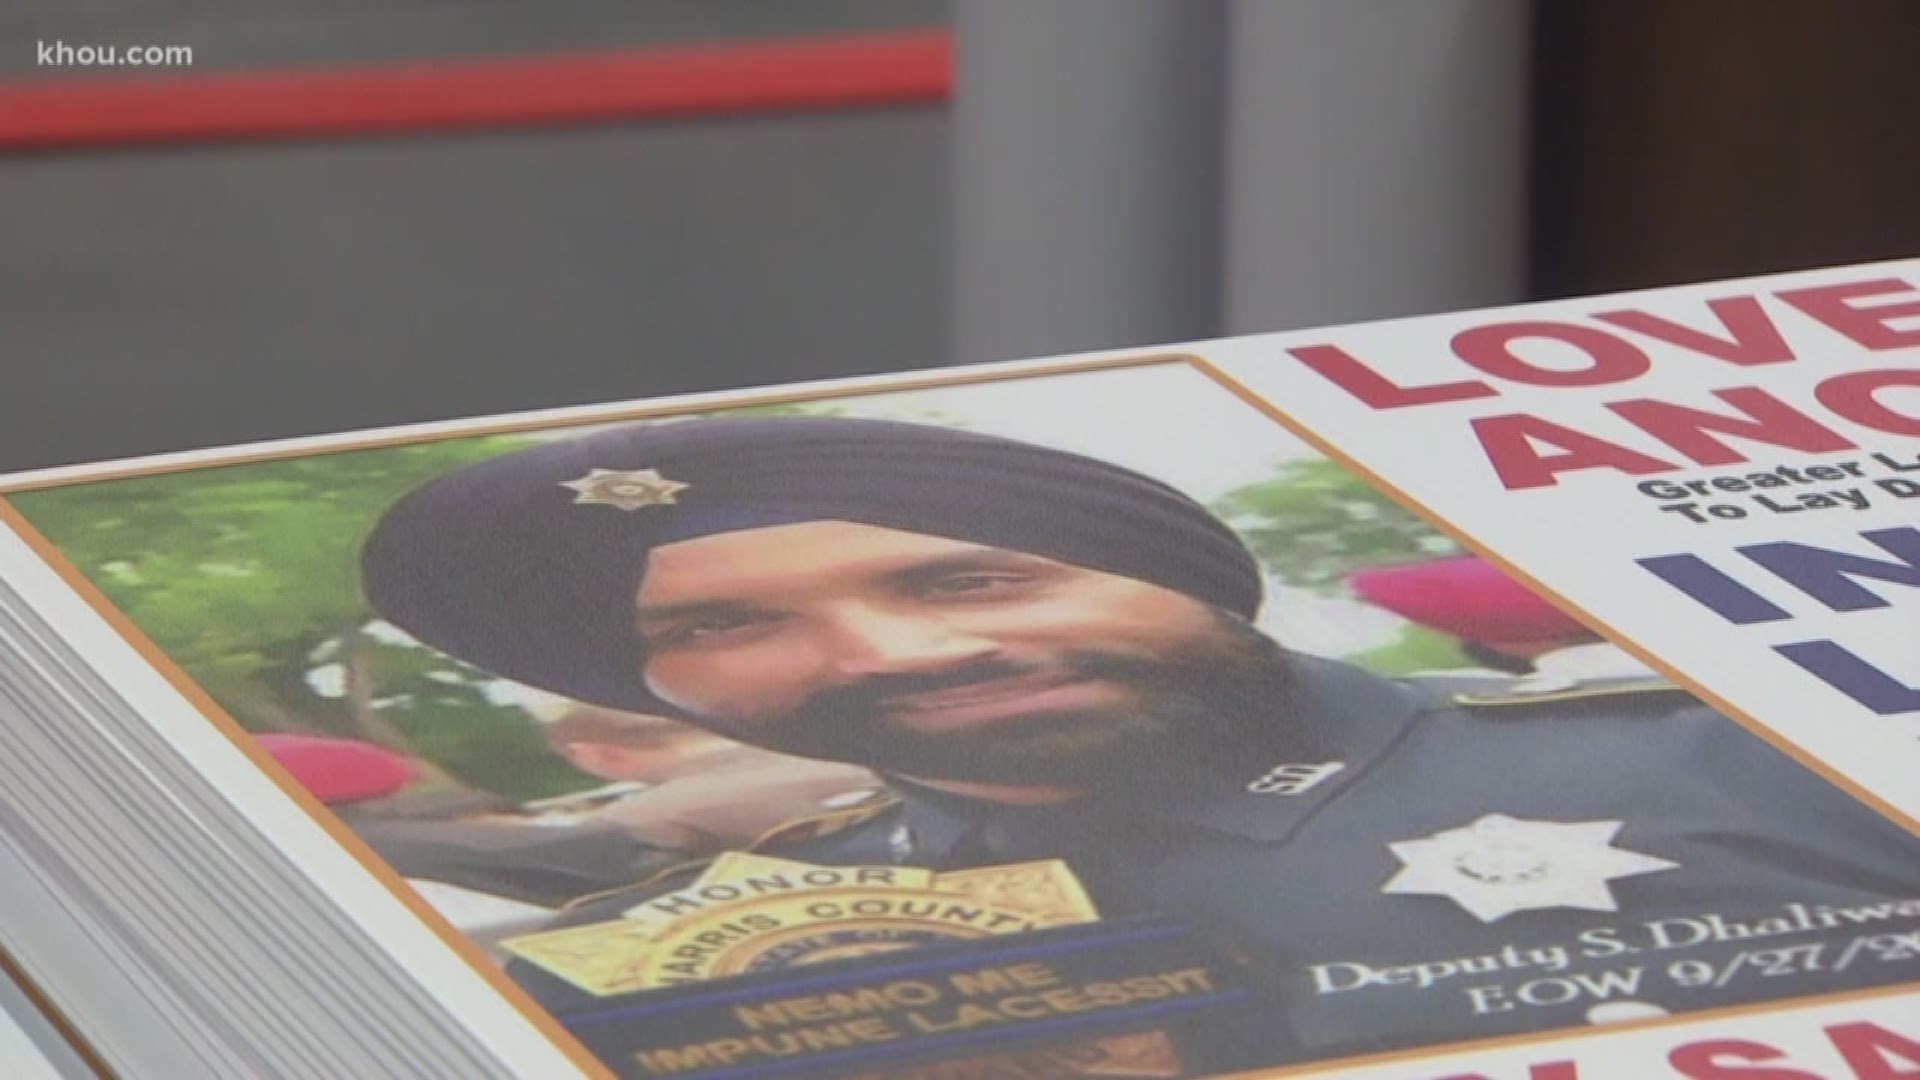 From signs to buying a pizza from Papa Johns, there are many ways you can help Deputy Sandeep Dhaliwal's family.